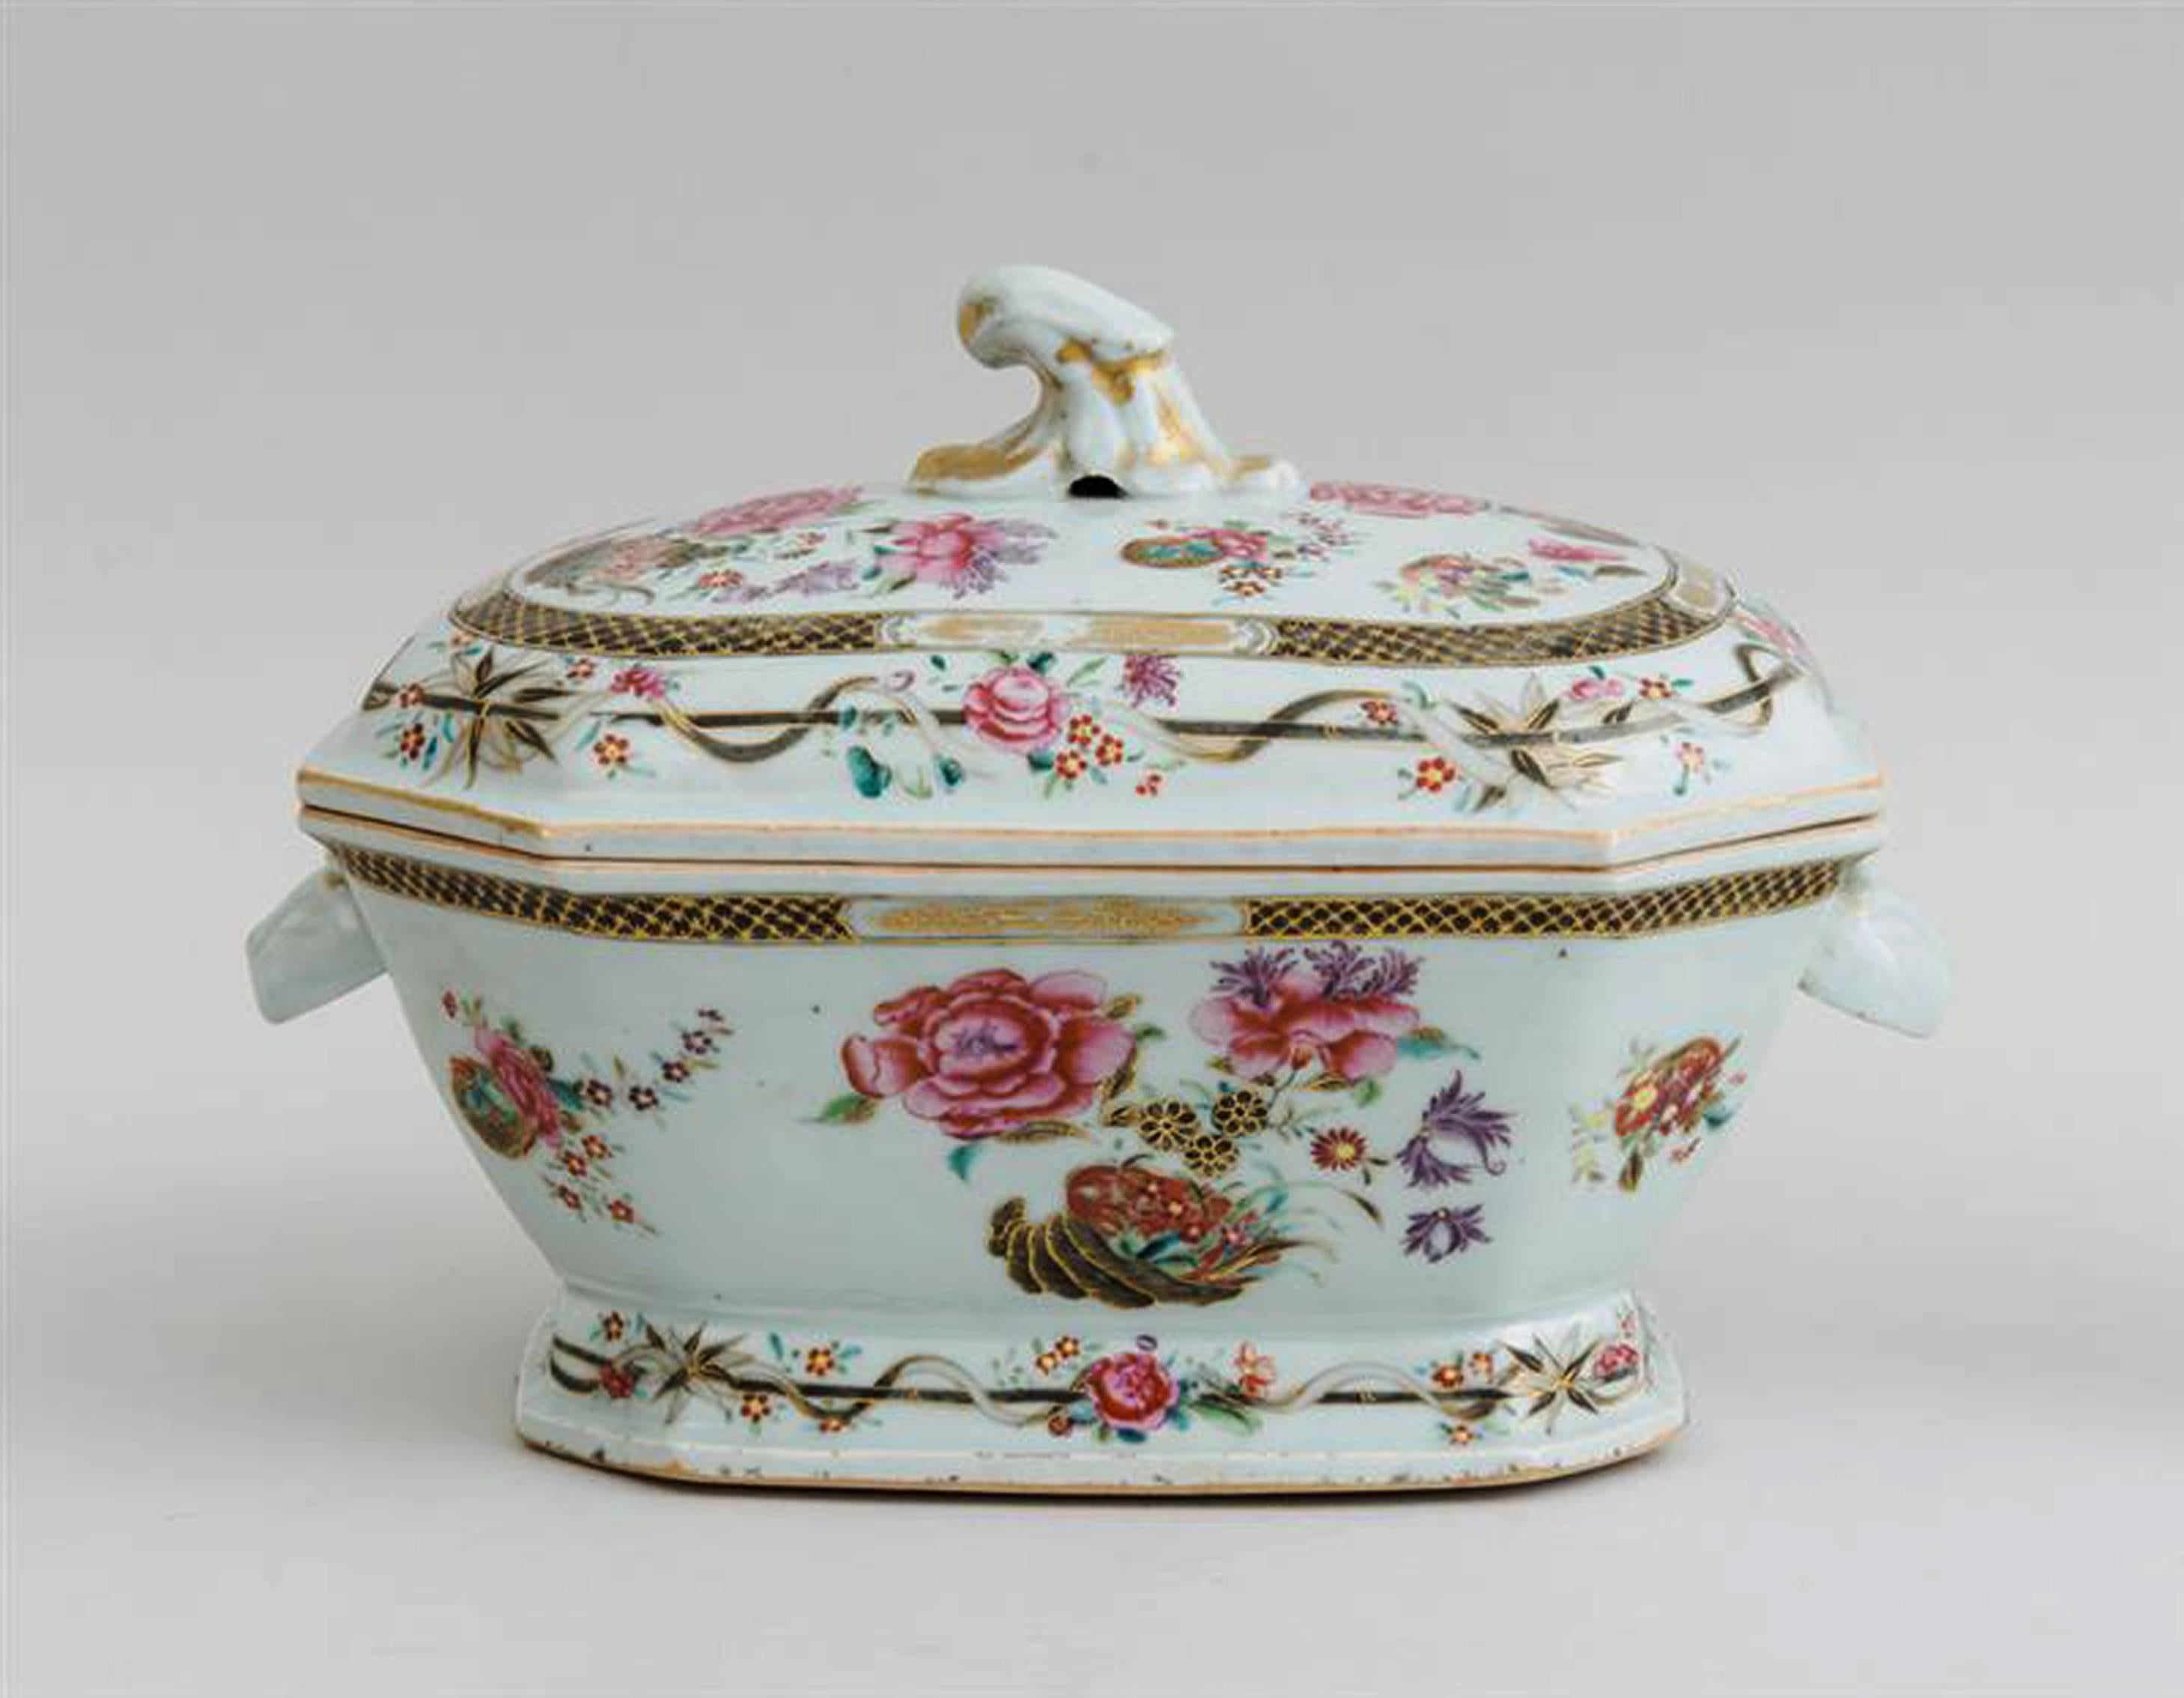 Mid-18th Century Chinese Export Porcelain Famille Rose Soup Tureen, Cover and Stand, Circa 1765